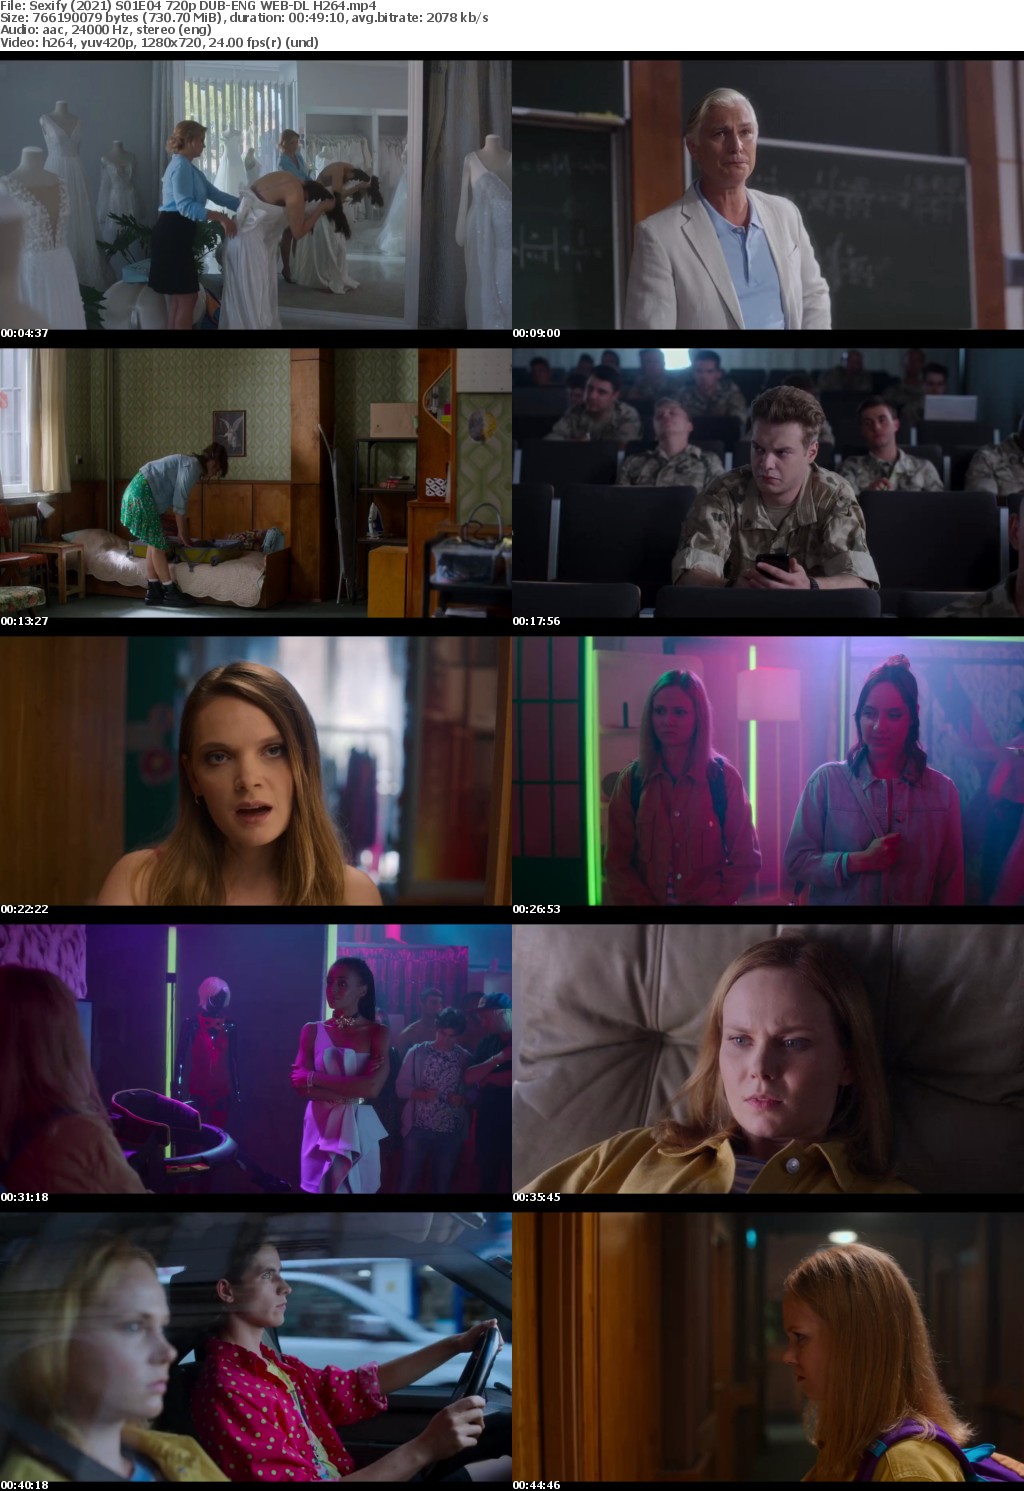 Sexify (2021) Season 1 Complete 720p NF DUB-ENG WEB-DL H264